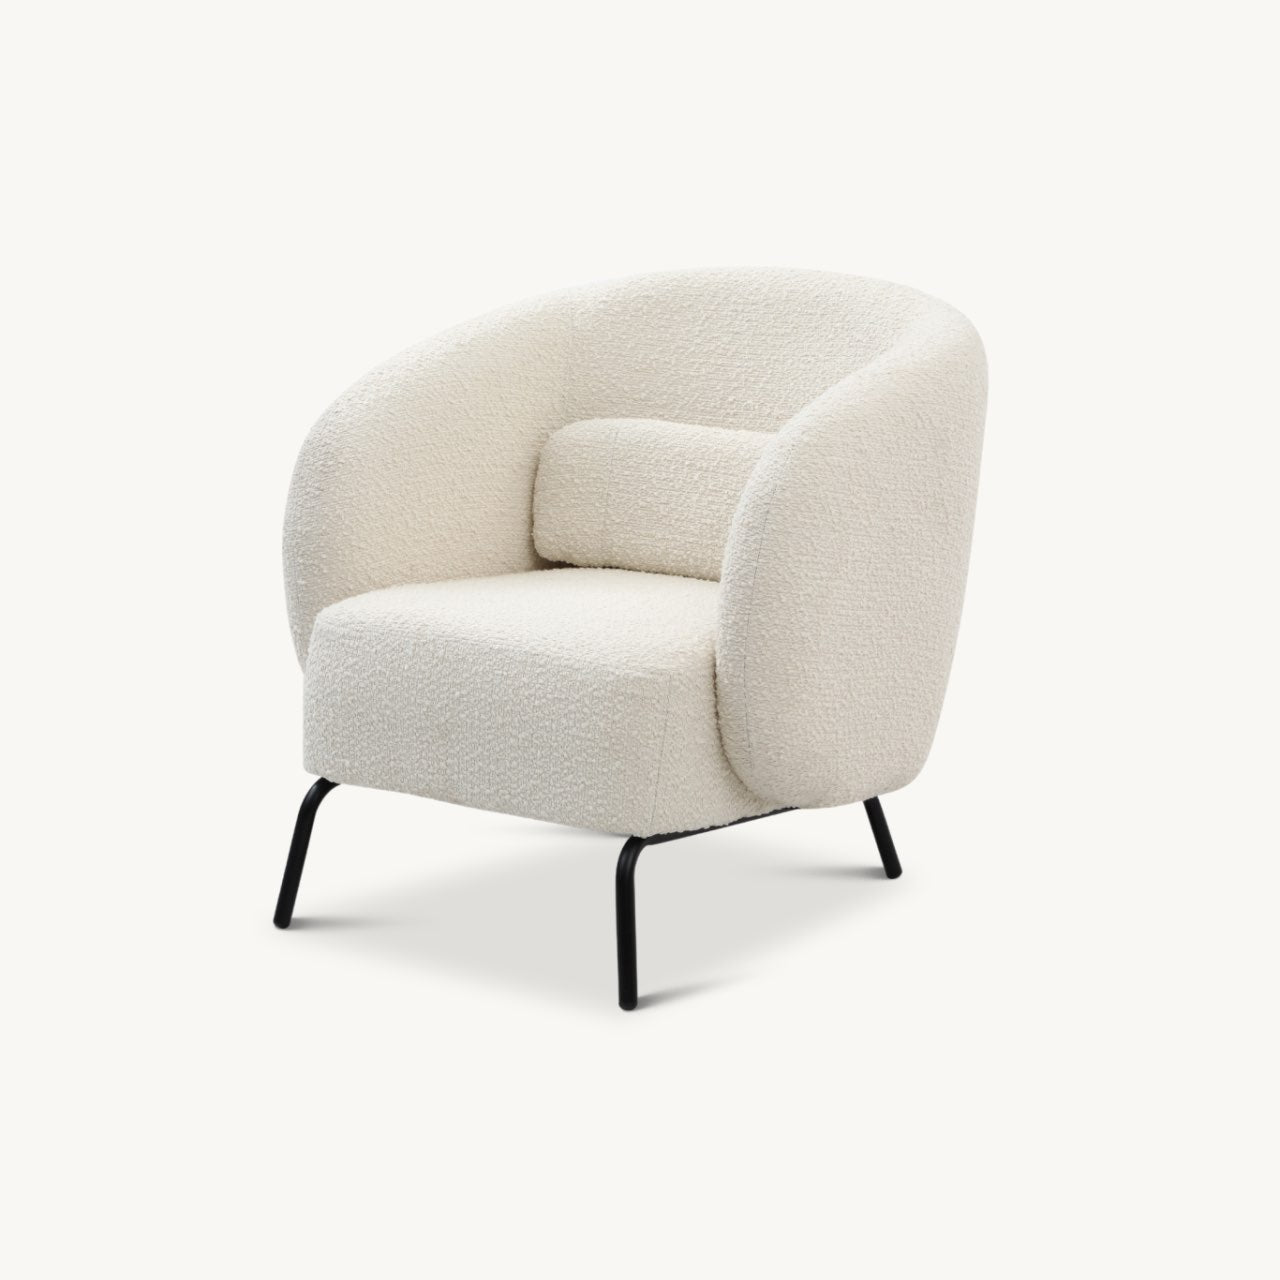 Contemporary curved design armchair in boucle fabric